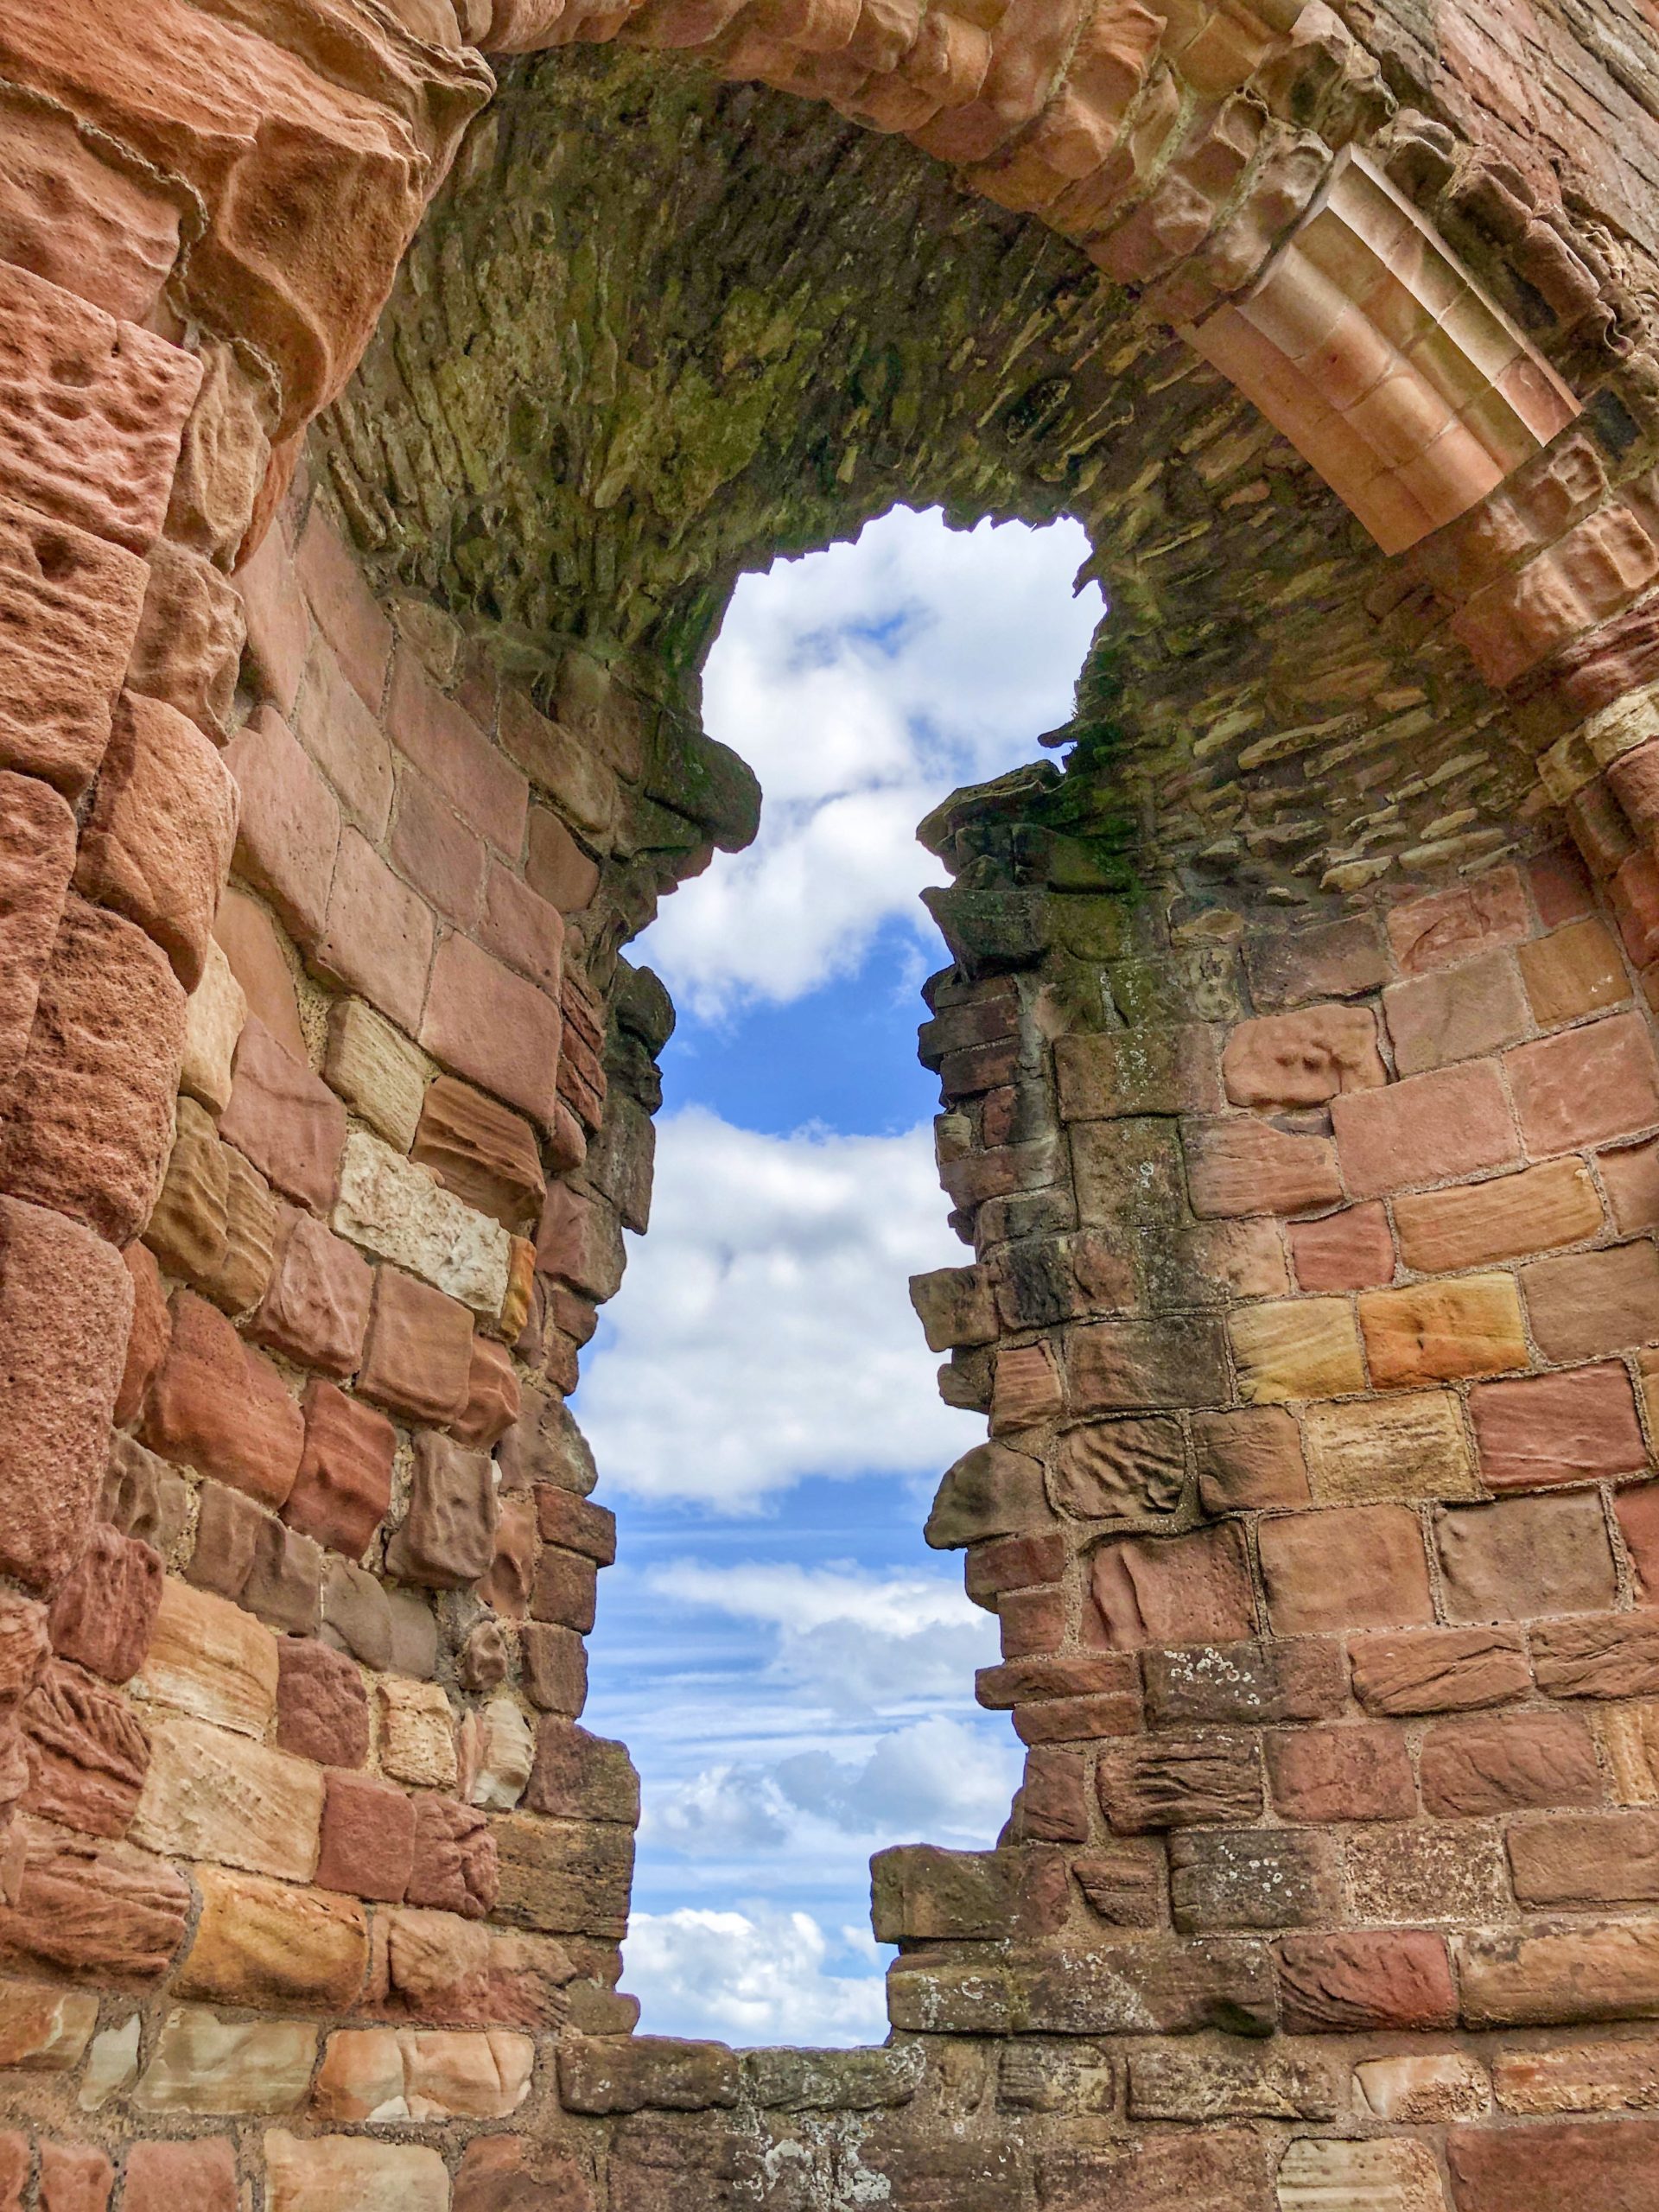 What To Do On Holy Island of Lindisfarne: Lindisfarne Priory